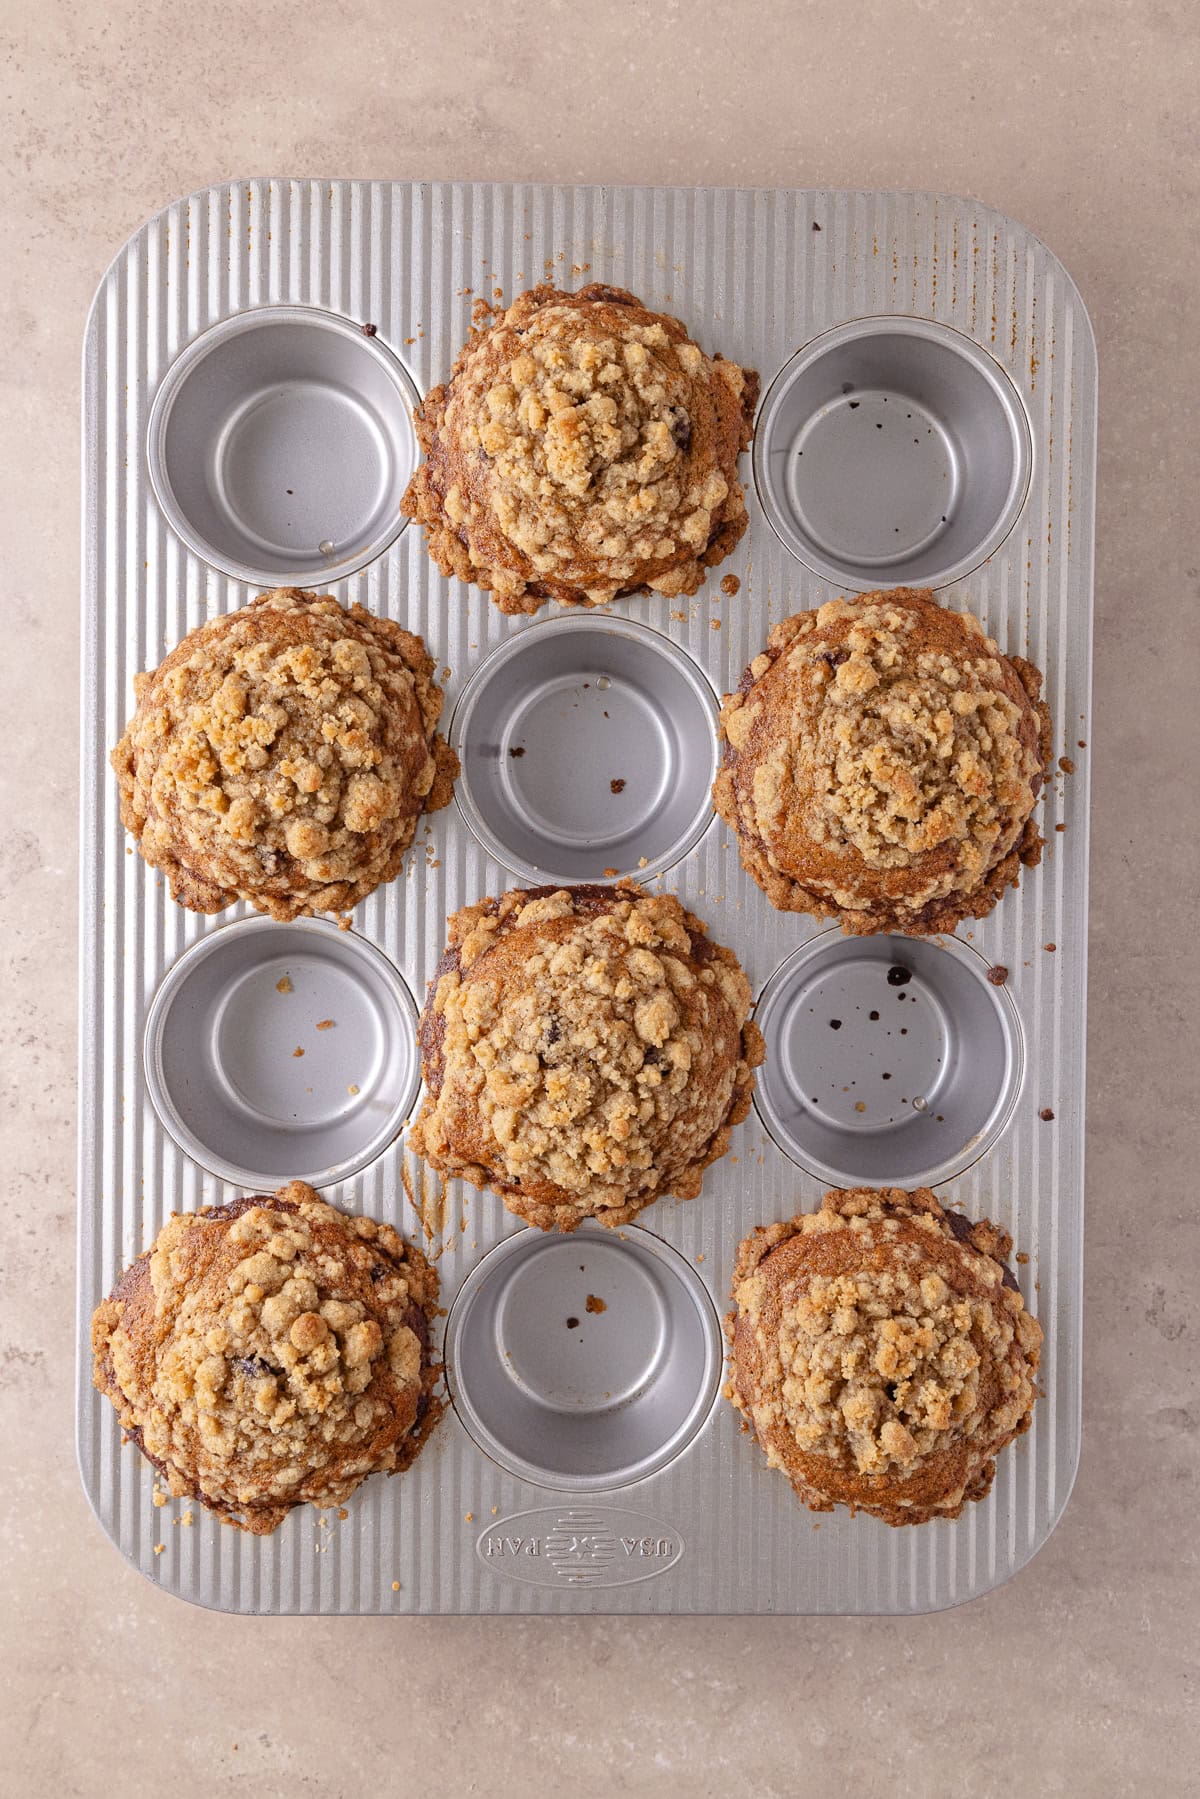 Banana espresso muffins are fully baked and are in the muffin pan.